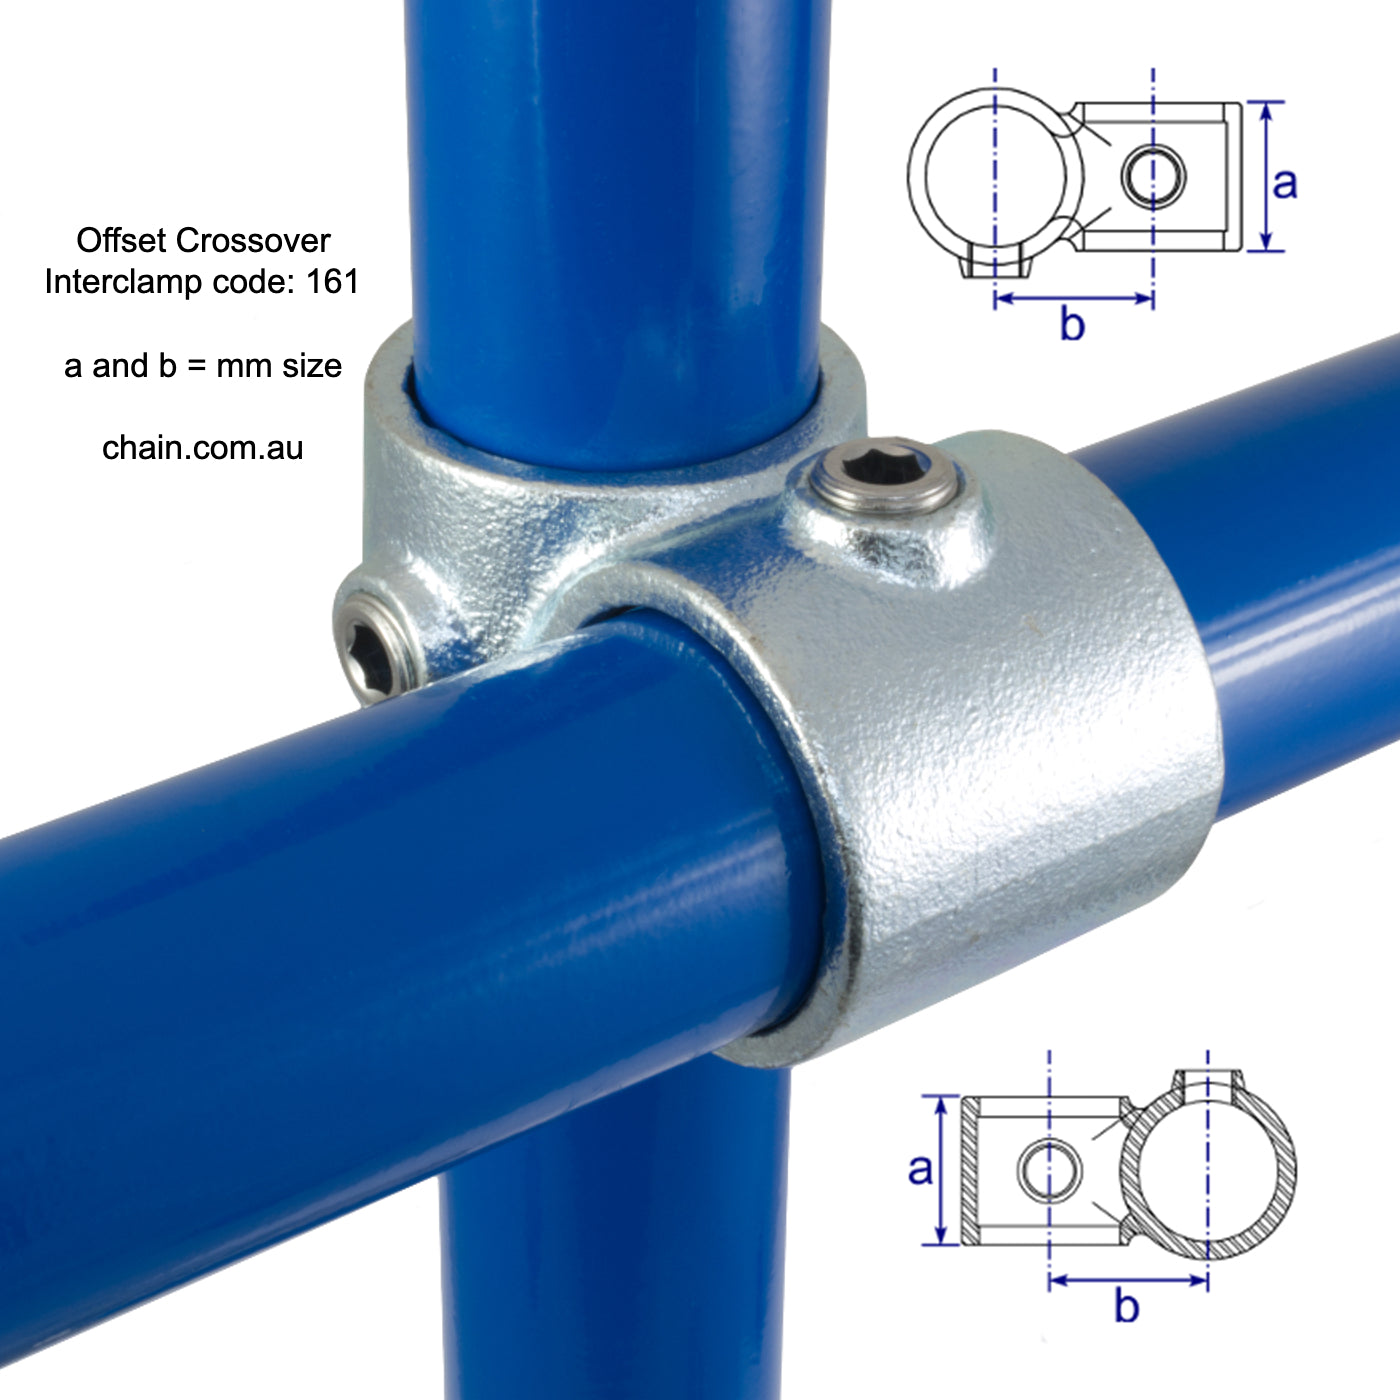 Offset Crossover by Interclamp, Code 161. Shop rail, pipe and fence fittings online chain.com.au. Australia wide shipping.